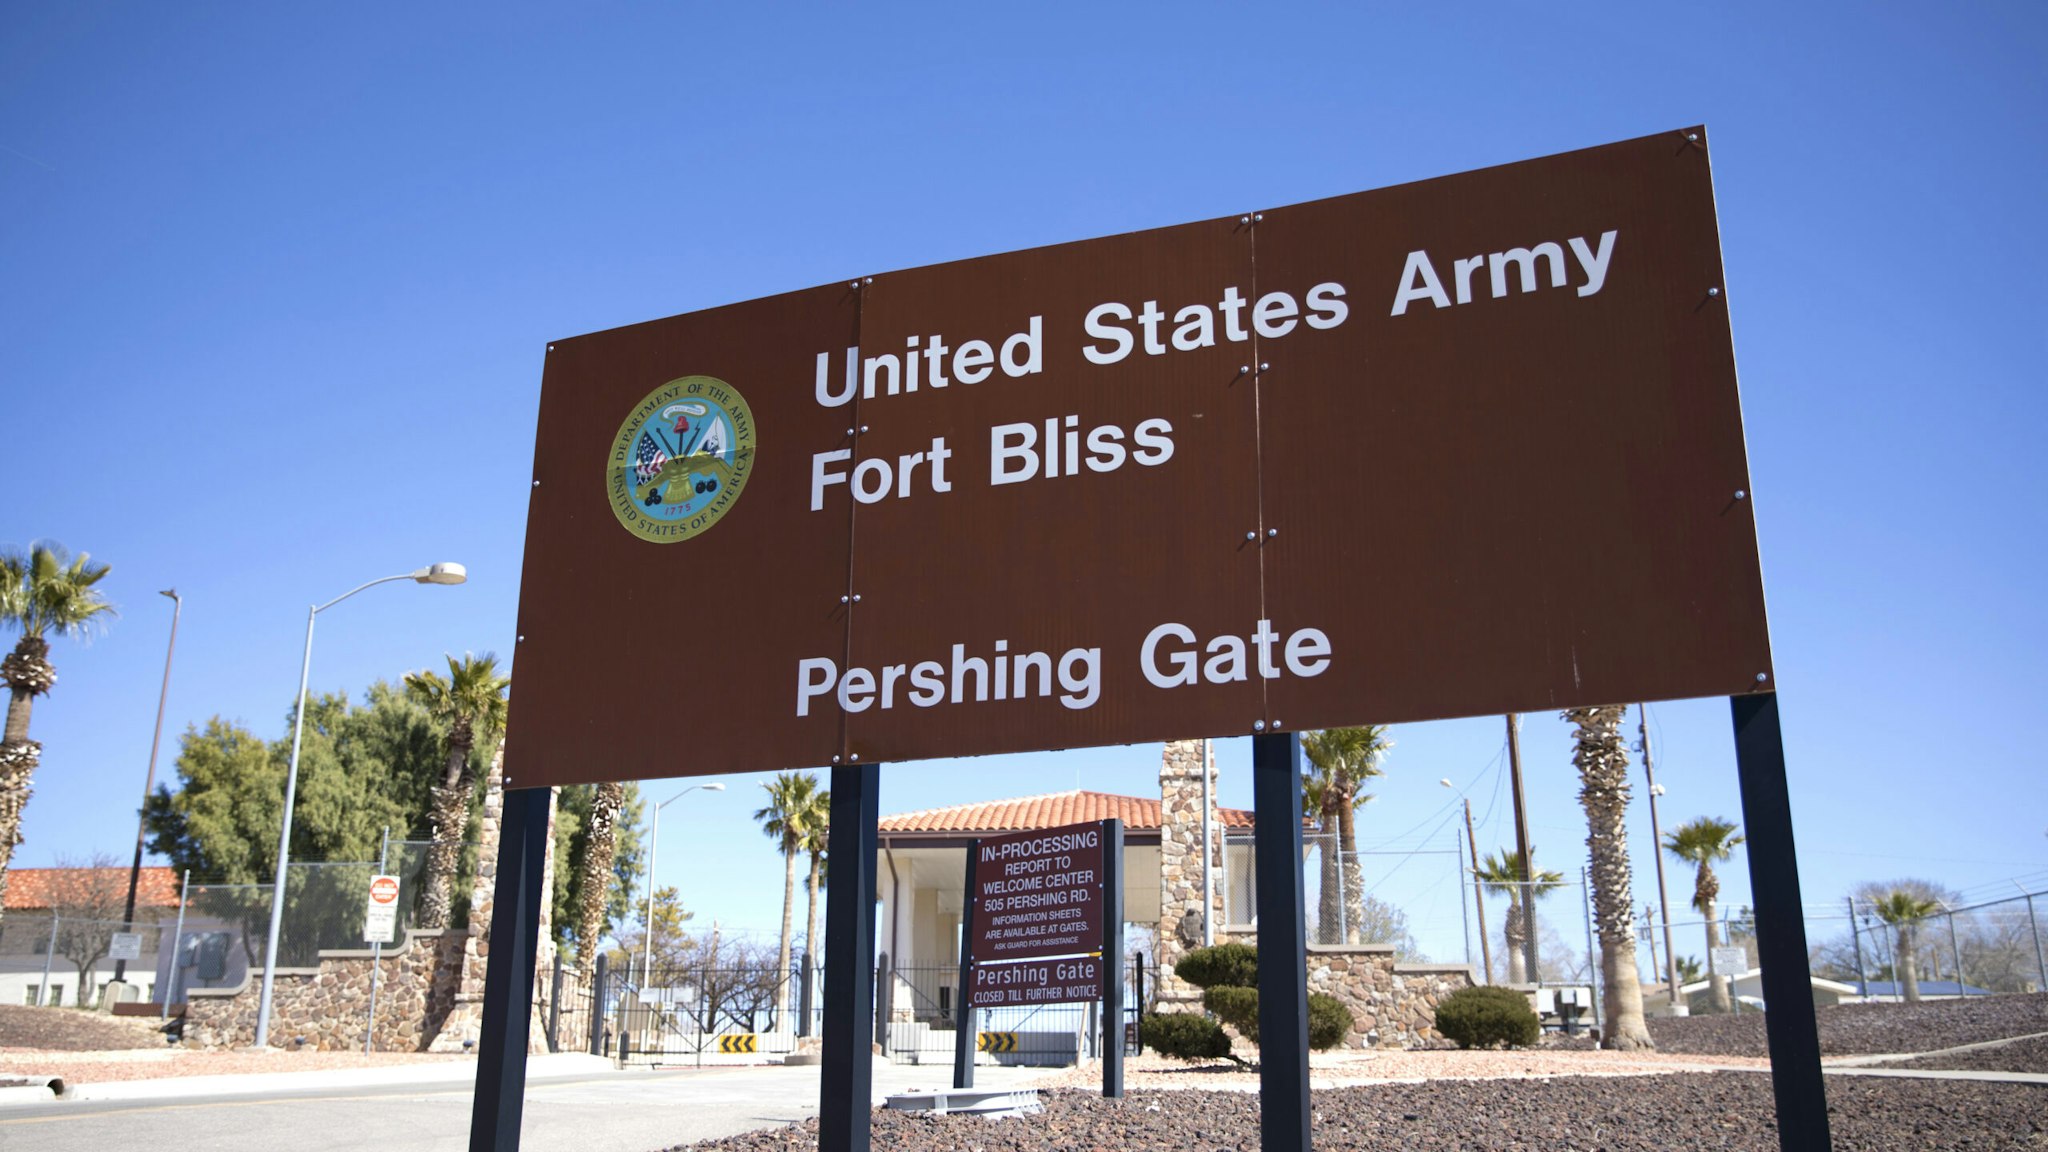 The U.S. Army Fort Bliss base stands in El Paso, Texas, U.S., on Tuesday, Feb. 12, 2019. President Trump, while making his case for building a wall along the U.S.-Mexico border, has repeatedly claimed that crime rates dropped in El Paso after a barrier along the the border with Juarez was built a decade ago. But many locals including El Paso's Republican mayor challenge that assertion, pointing to crime rates that dropped before construction even began.